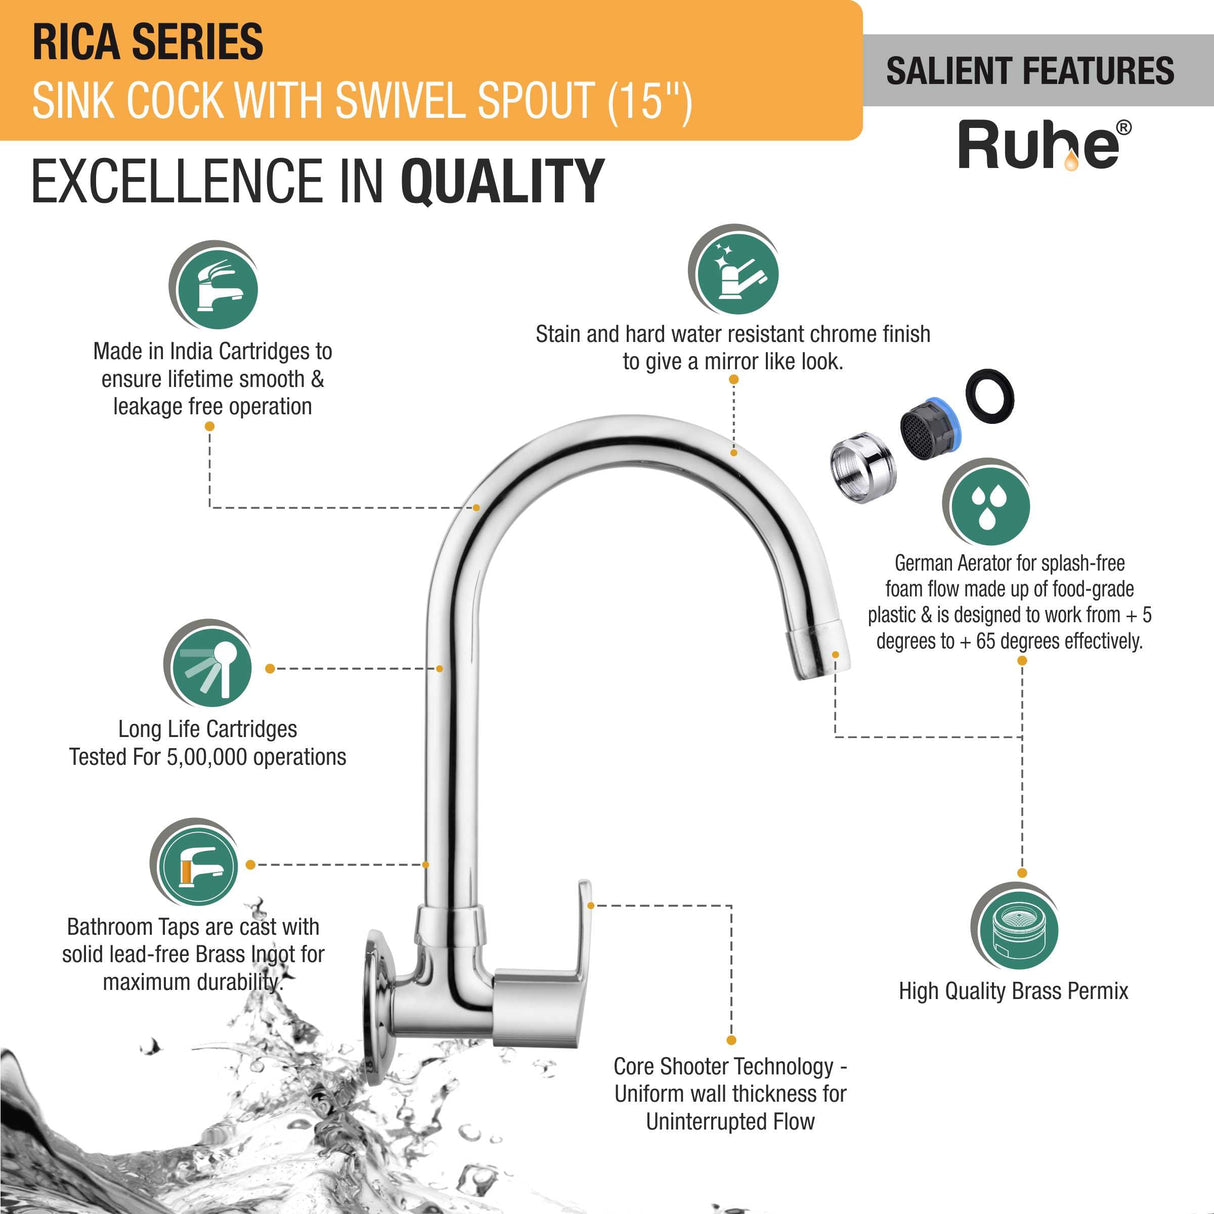 Rica Sink Tap with Medium (15 inches) Round Swivel Spout Brass Faucet features